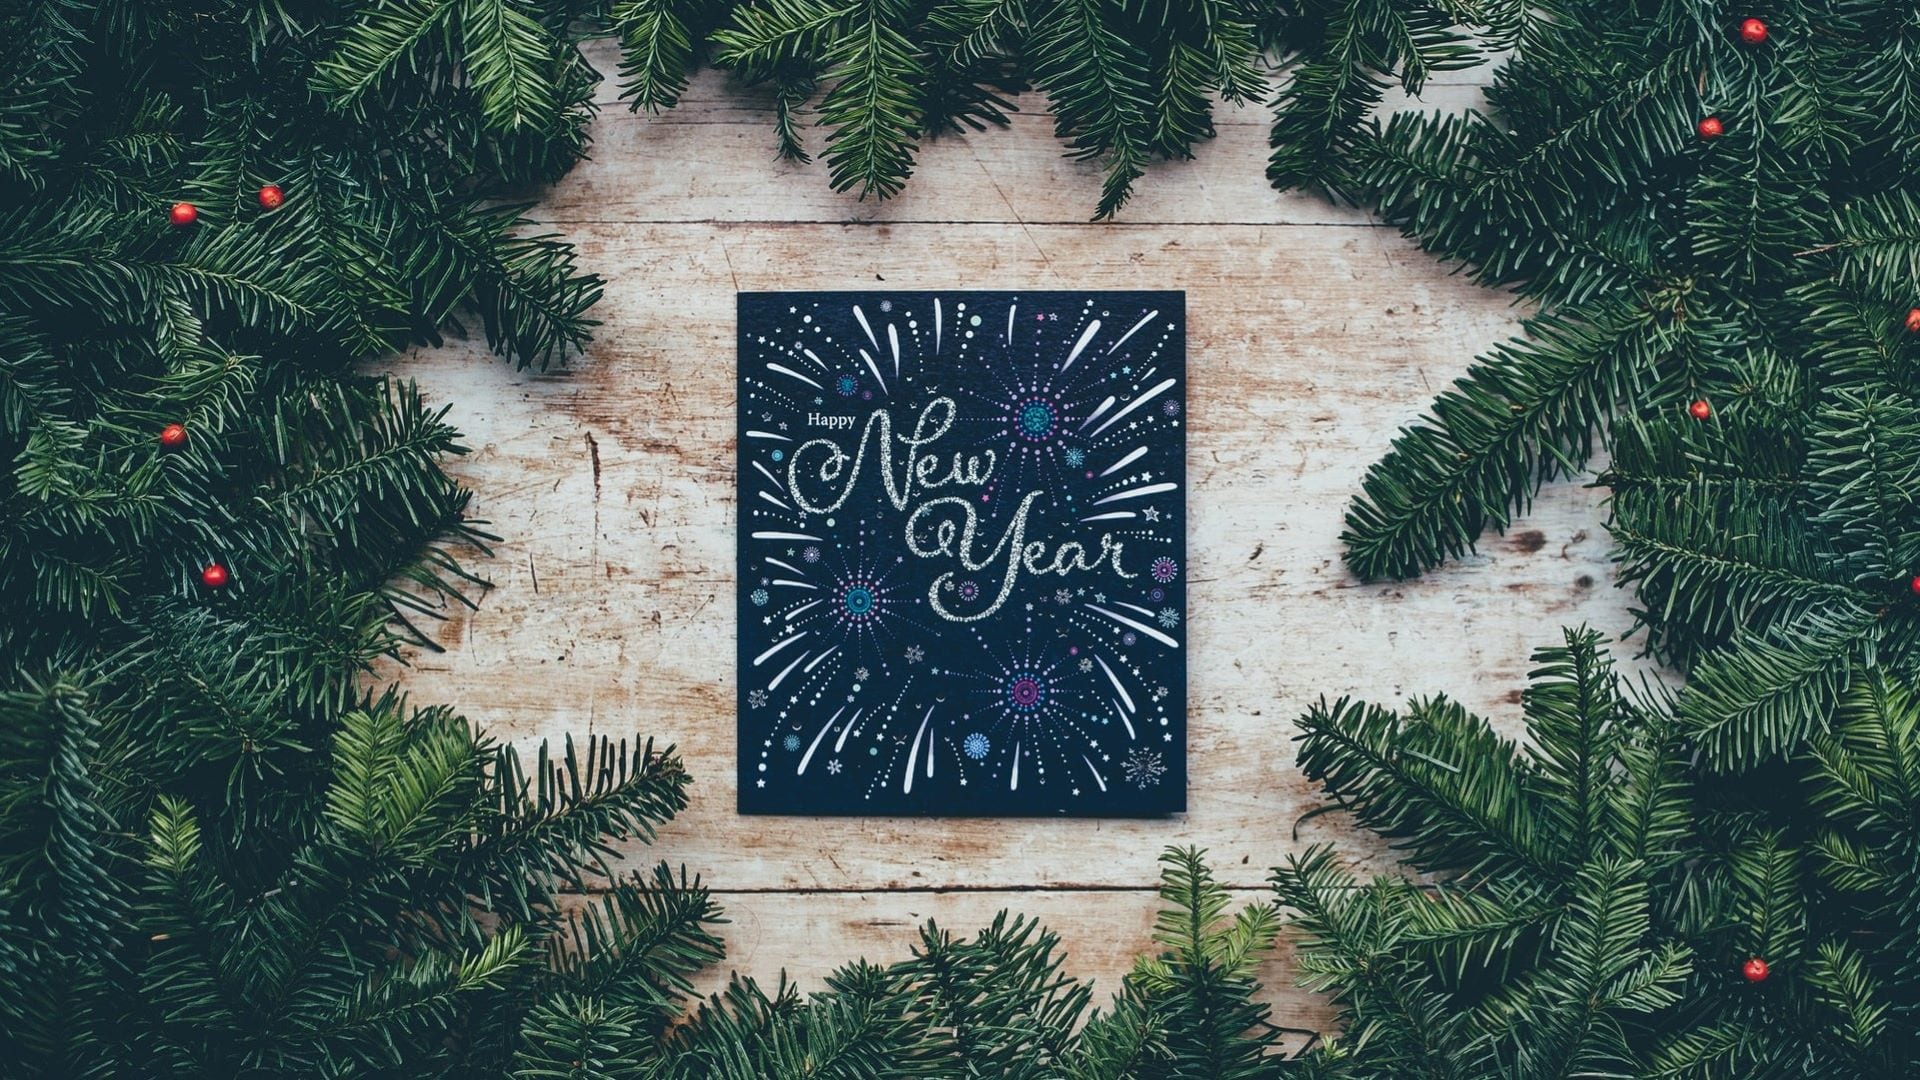 Happy New Year from Students For Liberty: 21 resolutions for 2021